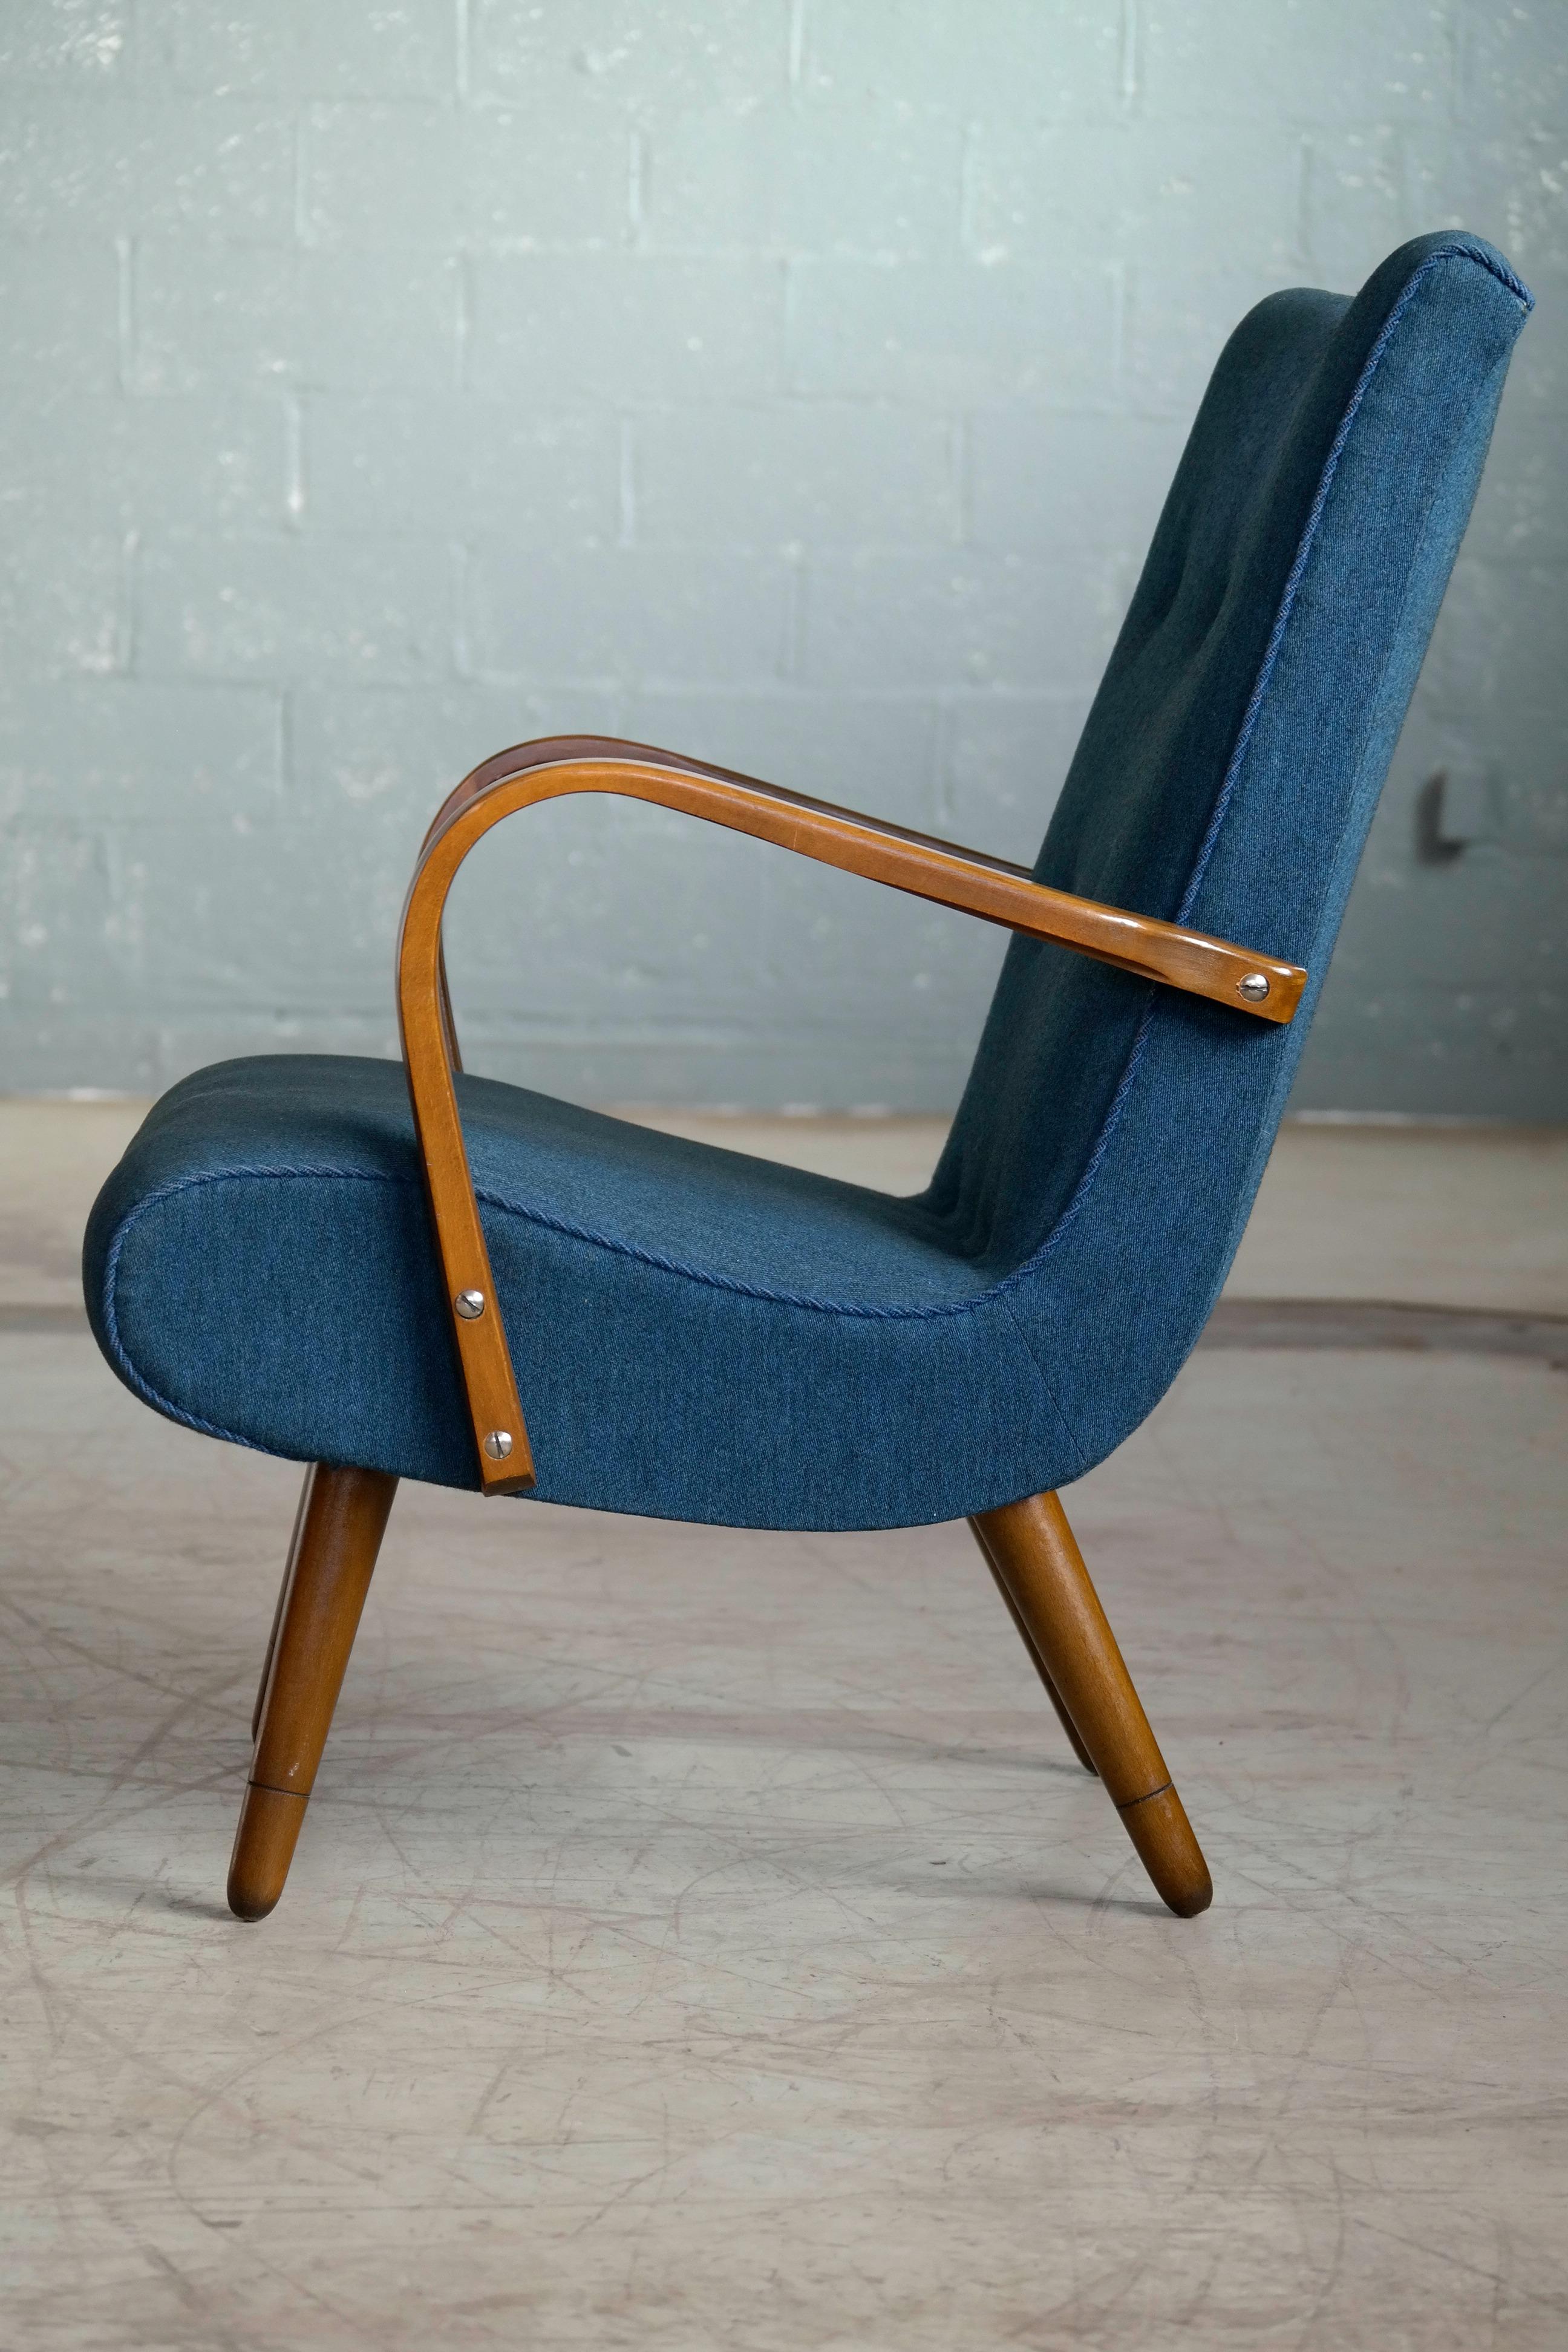 Mid-20th Century Danish Sculptural Lounge Chair with Curved Wooden Armrests, 1950s